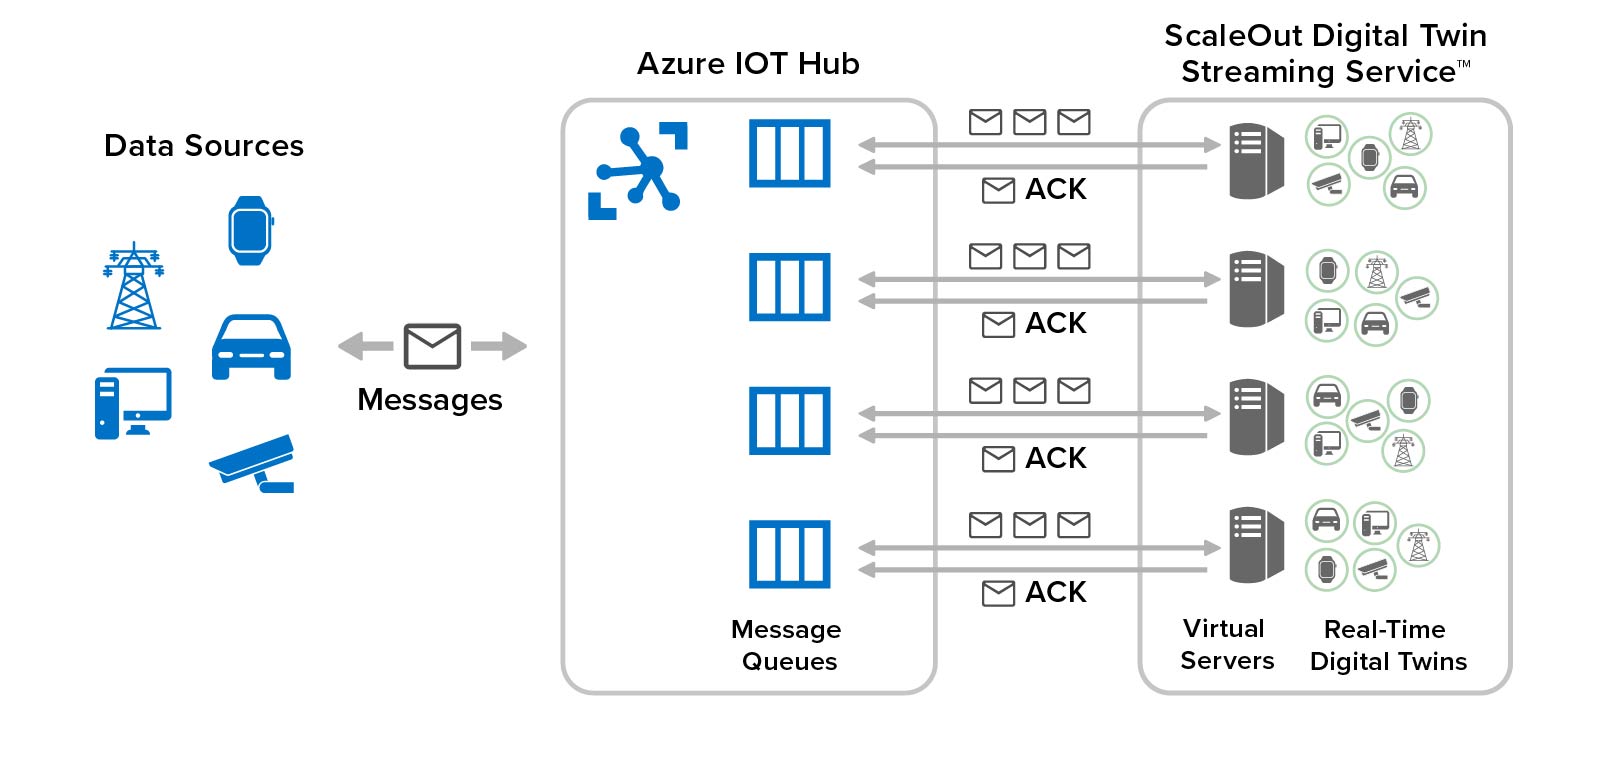 Connecting Azure IoT Hub to the ScaleOut Digital Twin Streaming Service